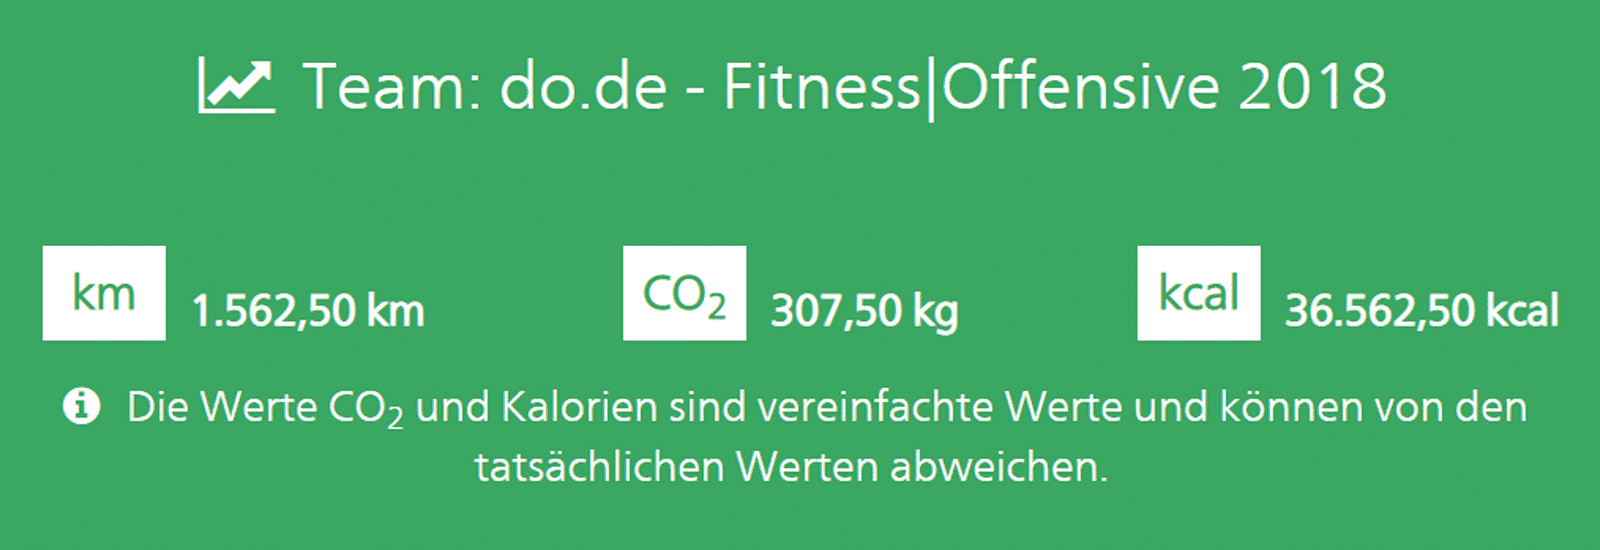 Auswertung Fitness-Offensive 2018